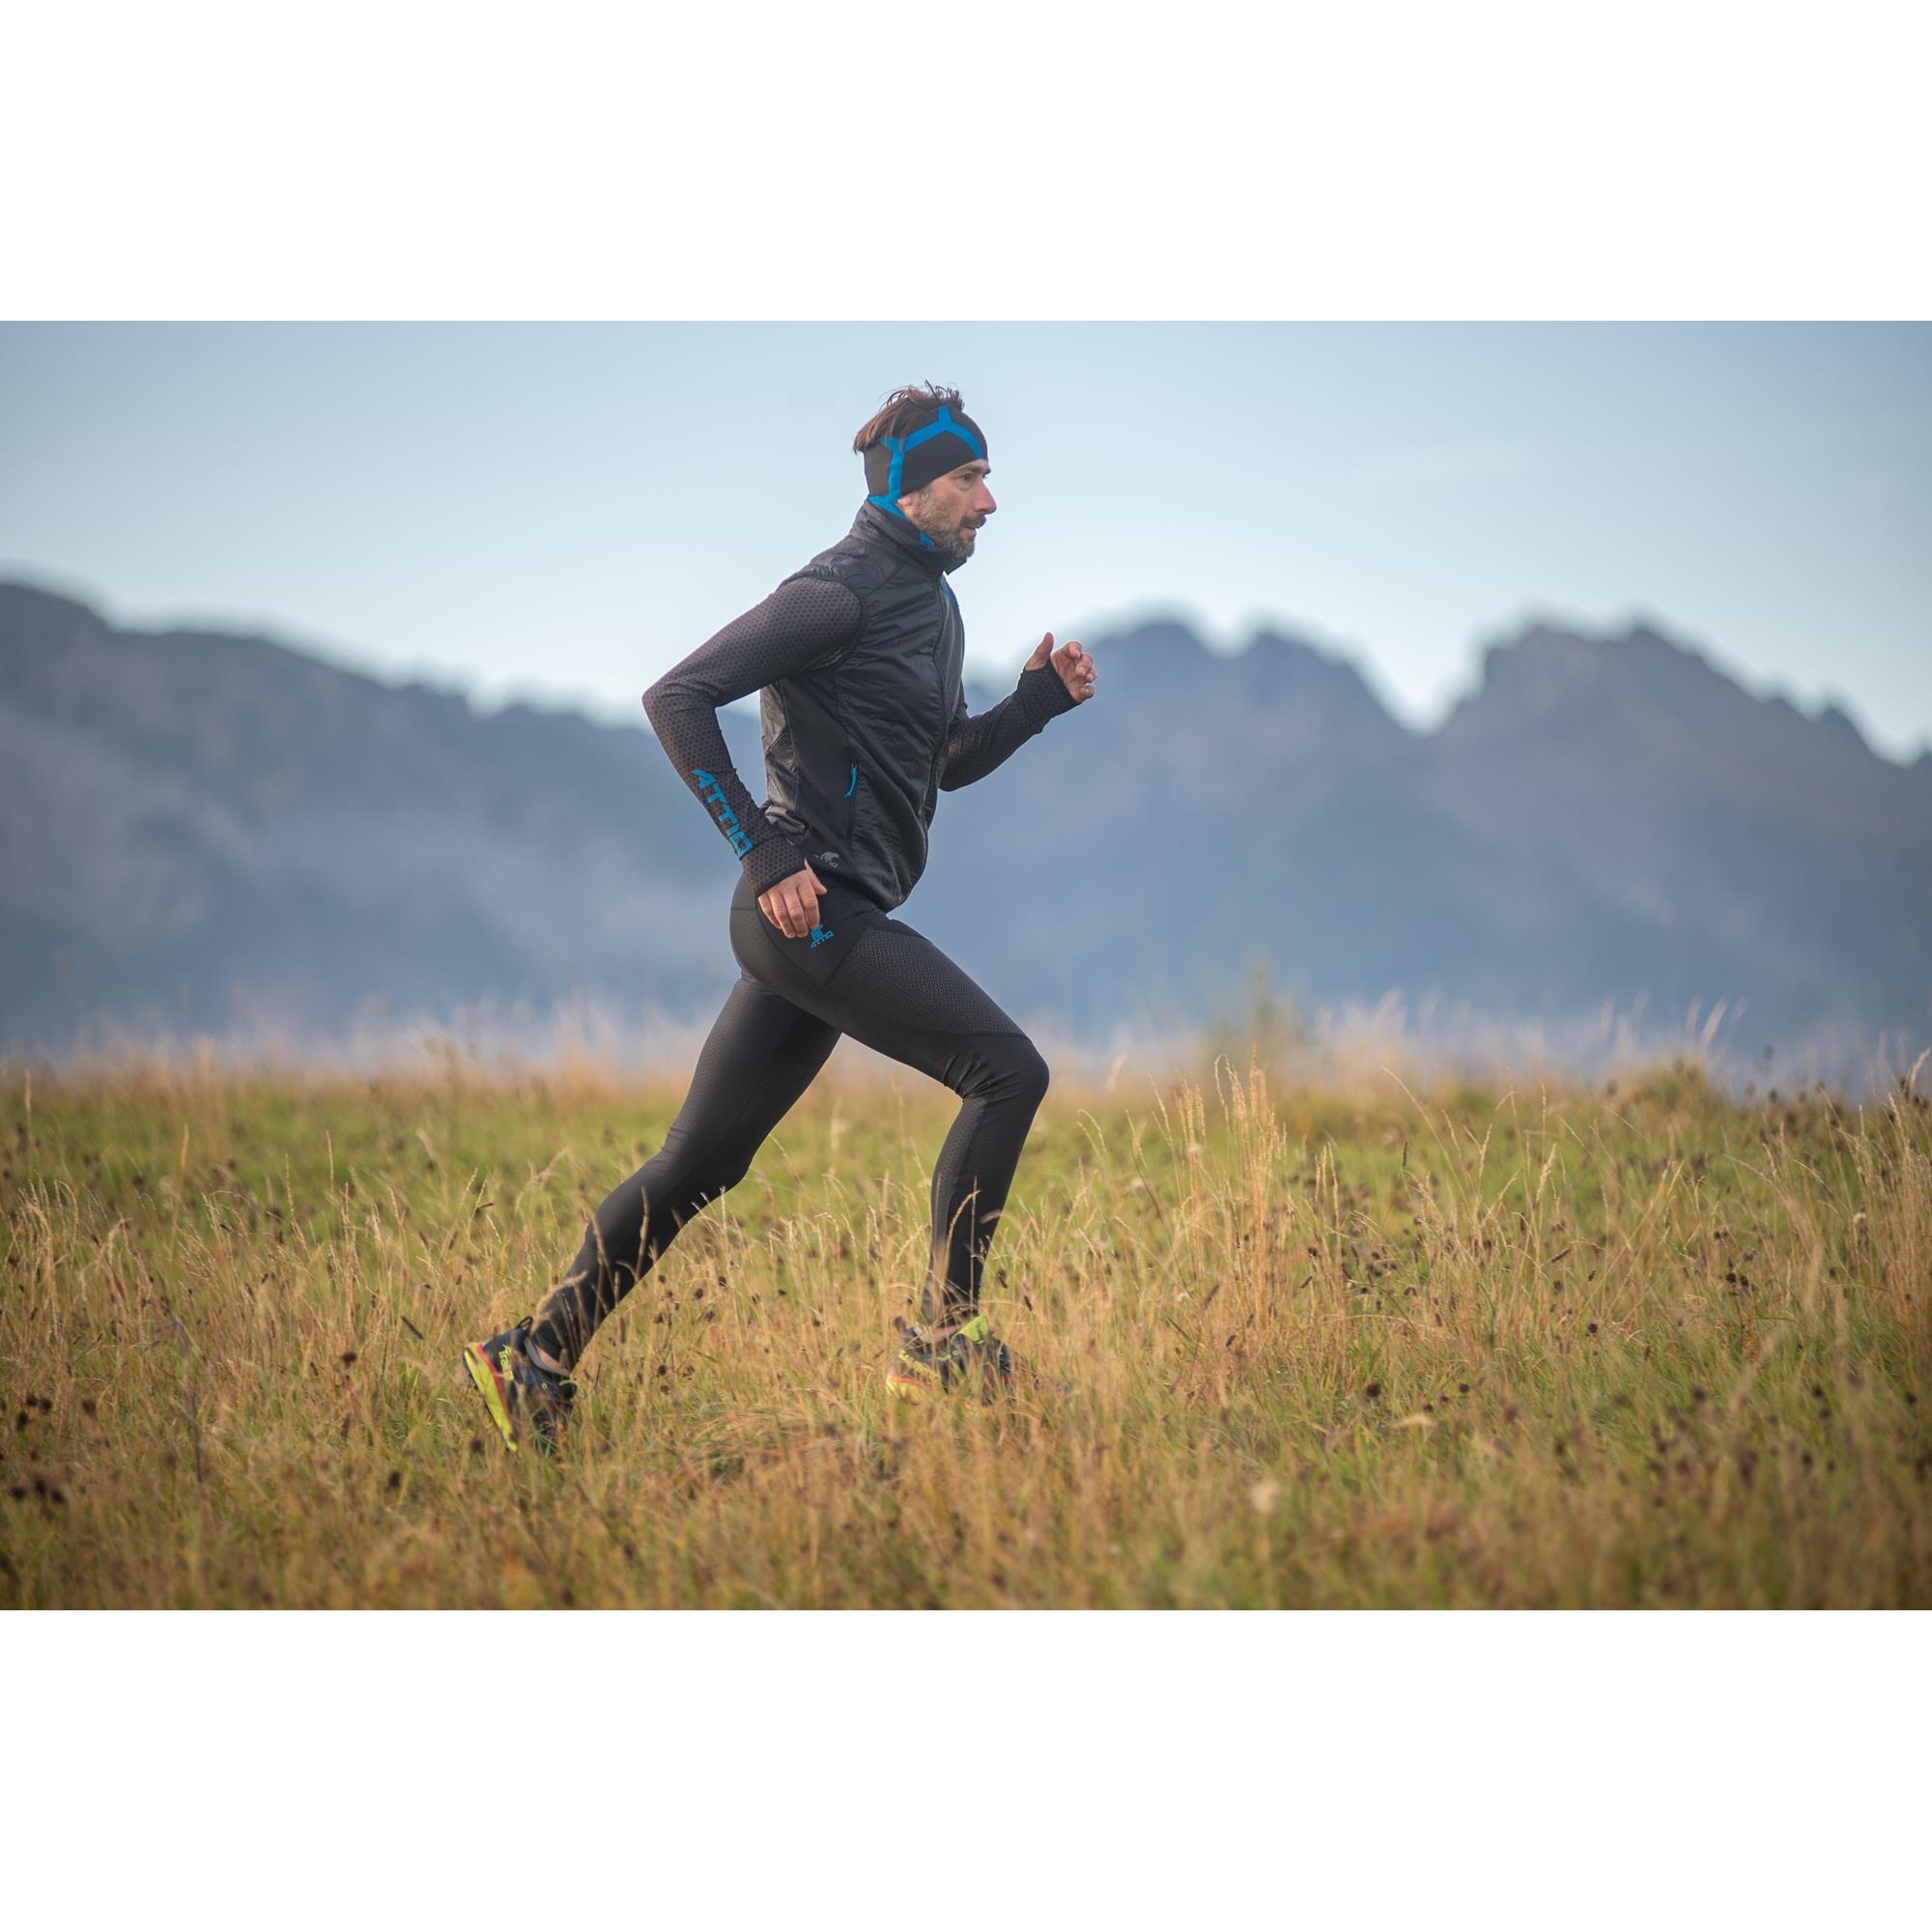 Lycra leggings - the final step in the evolution of a running fanatic, Running